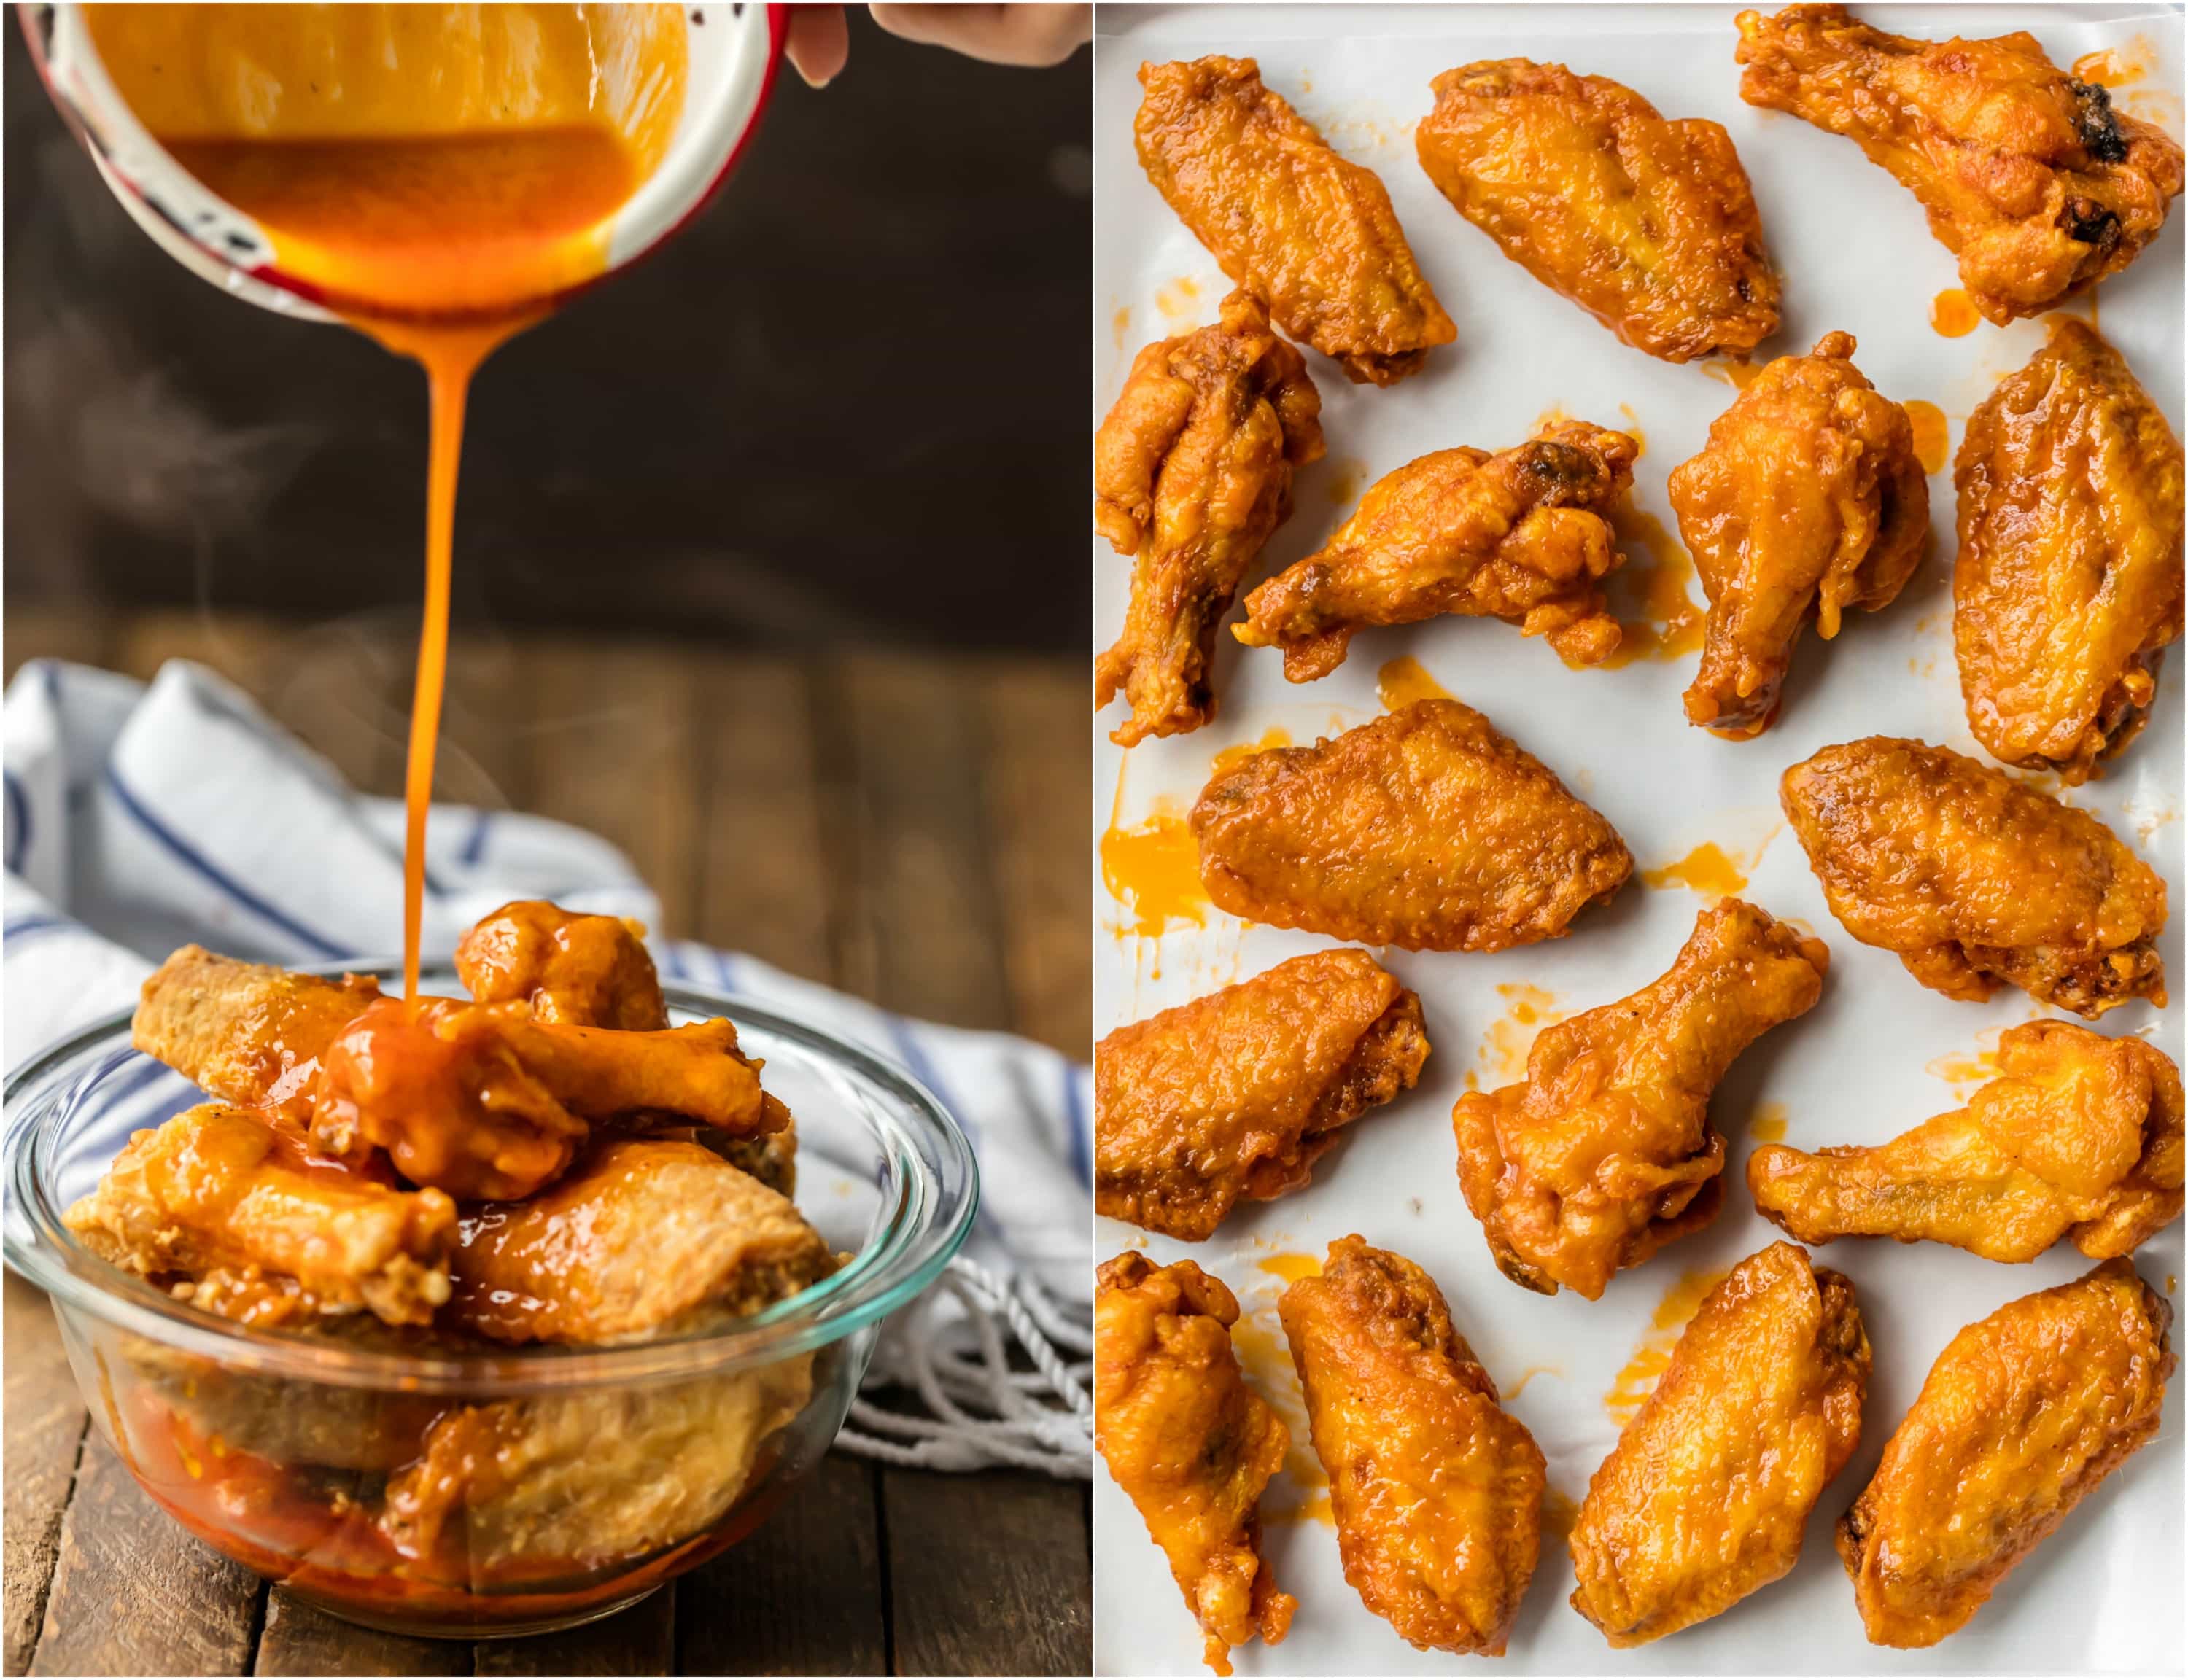 The BEST FRIED BUFFALO WINGS that just so happen to be GLUTEN FREE! Spicy deep fried buffalo chicken wings perfect for tailgating, the Super Bowl, and every day in between!